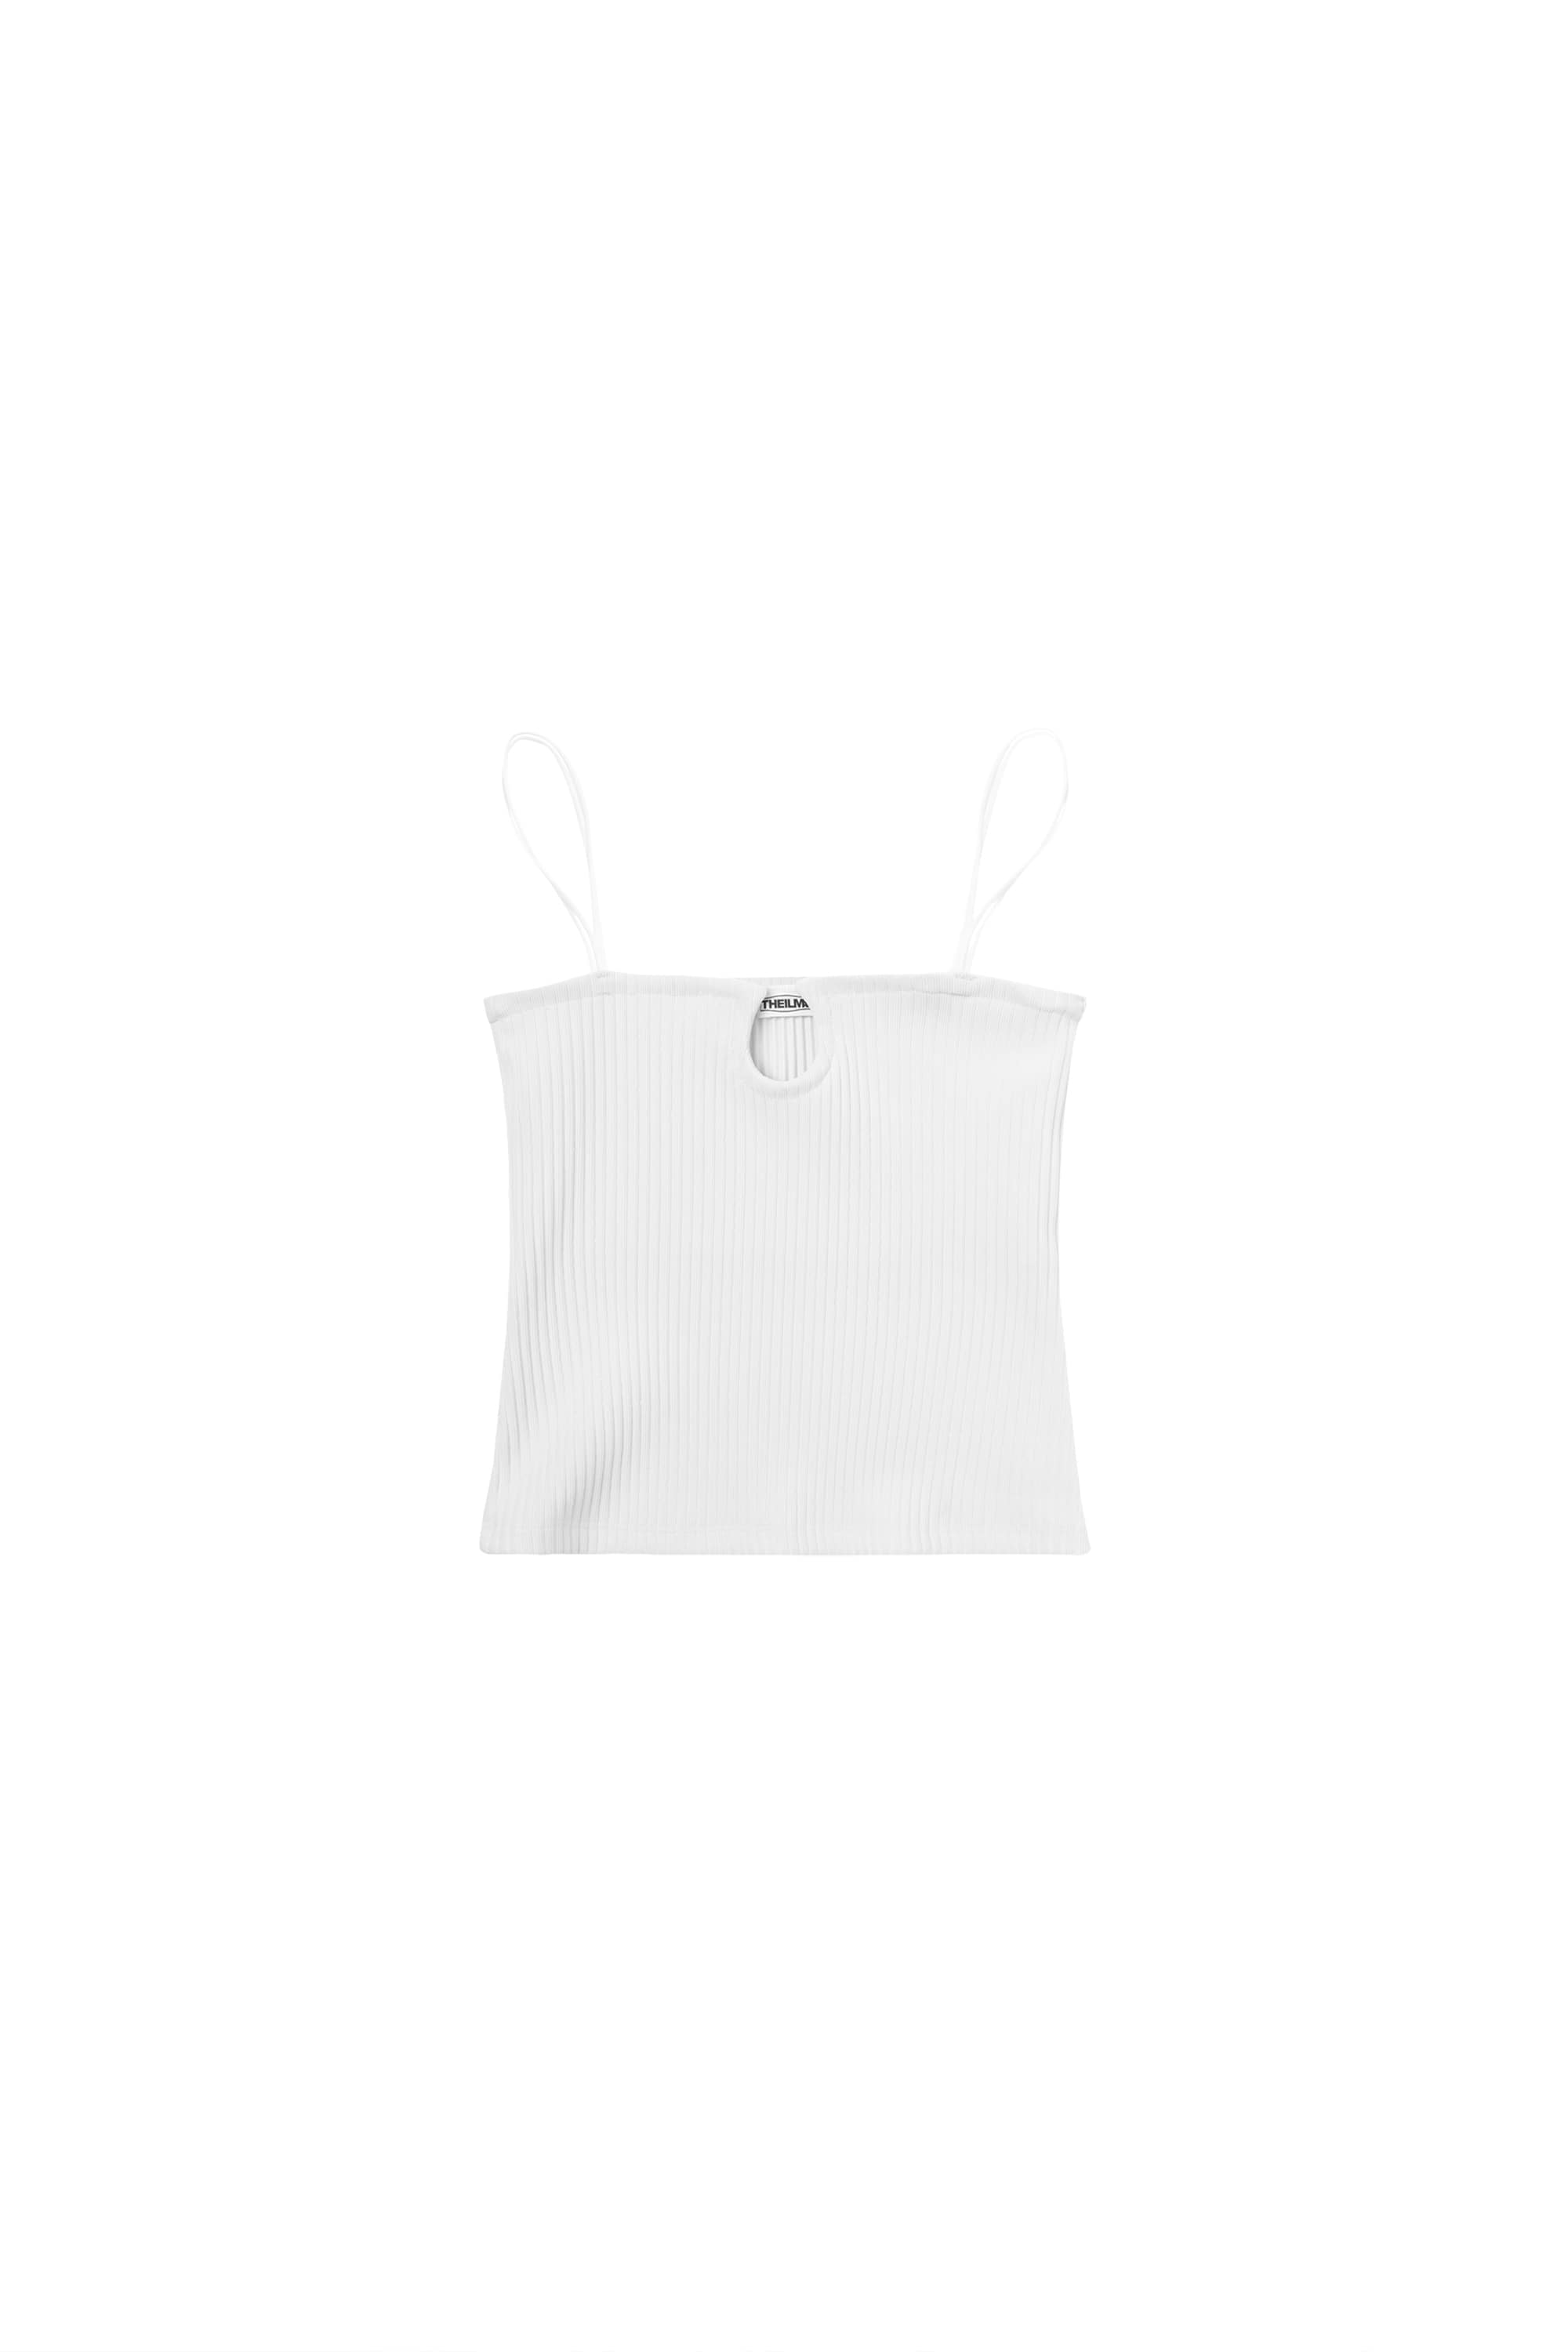 LIO WIRE TANK TOP (3 COLORS)